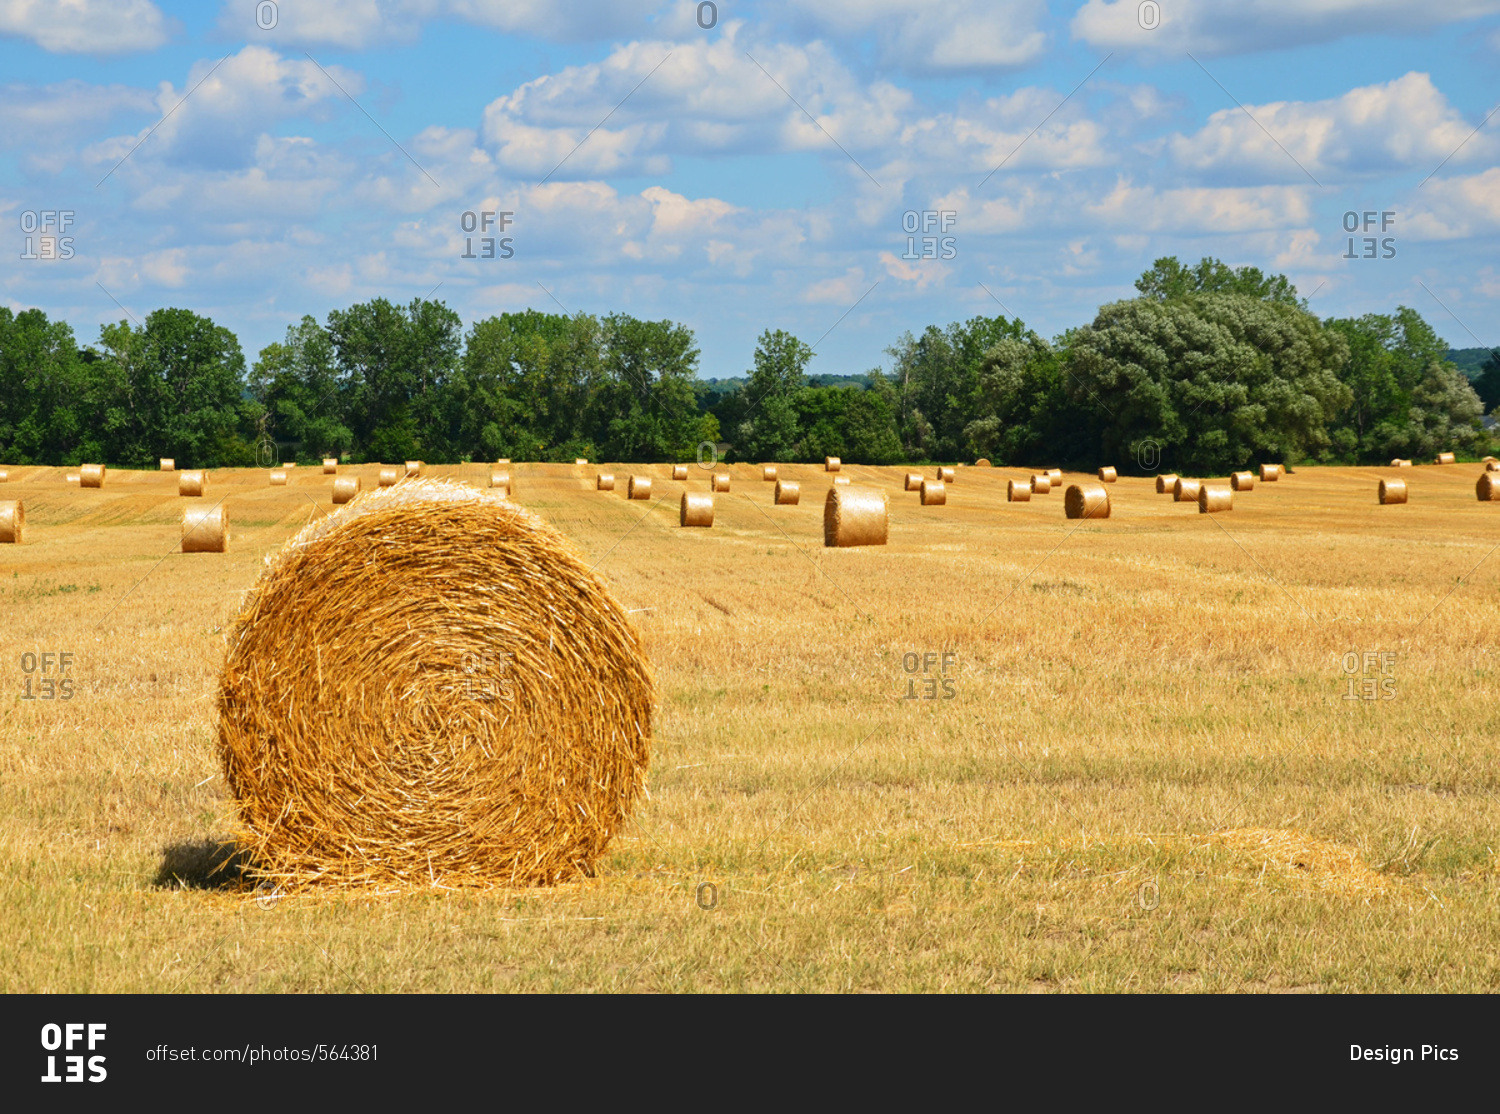 Bales of hay in a field with trees on the edge of the field under blue sky with cloud, New York, United States of America